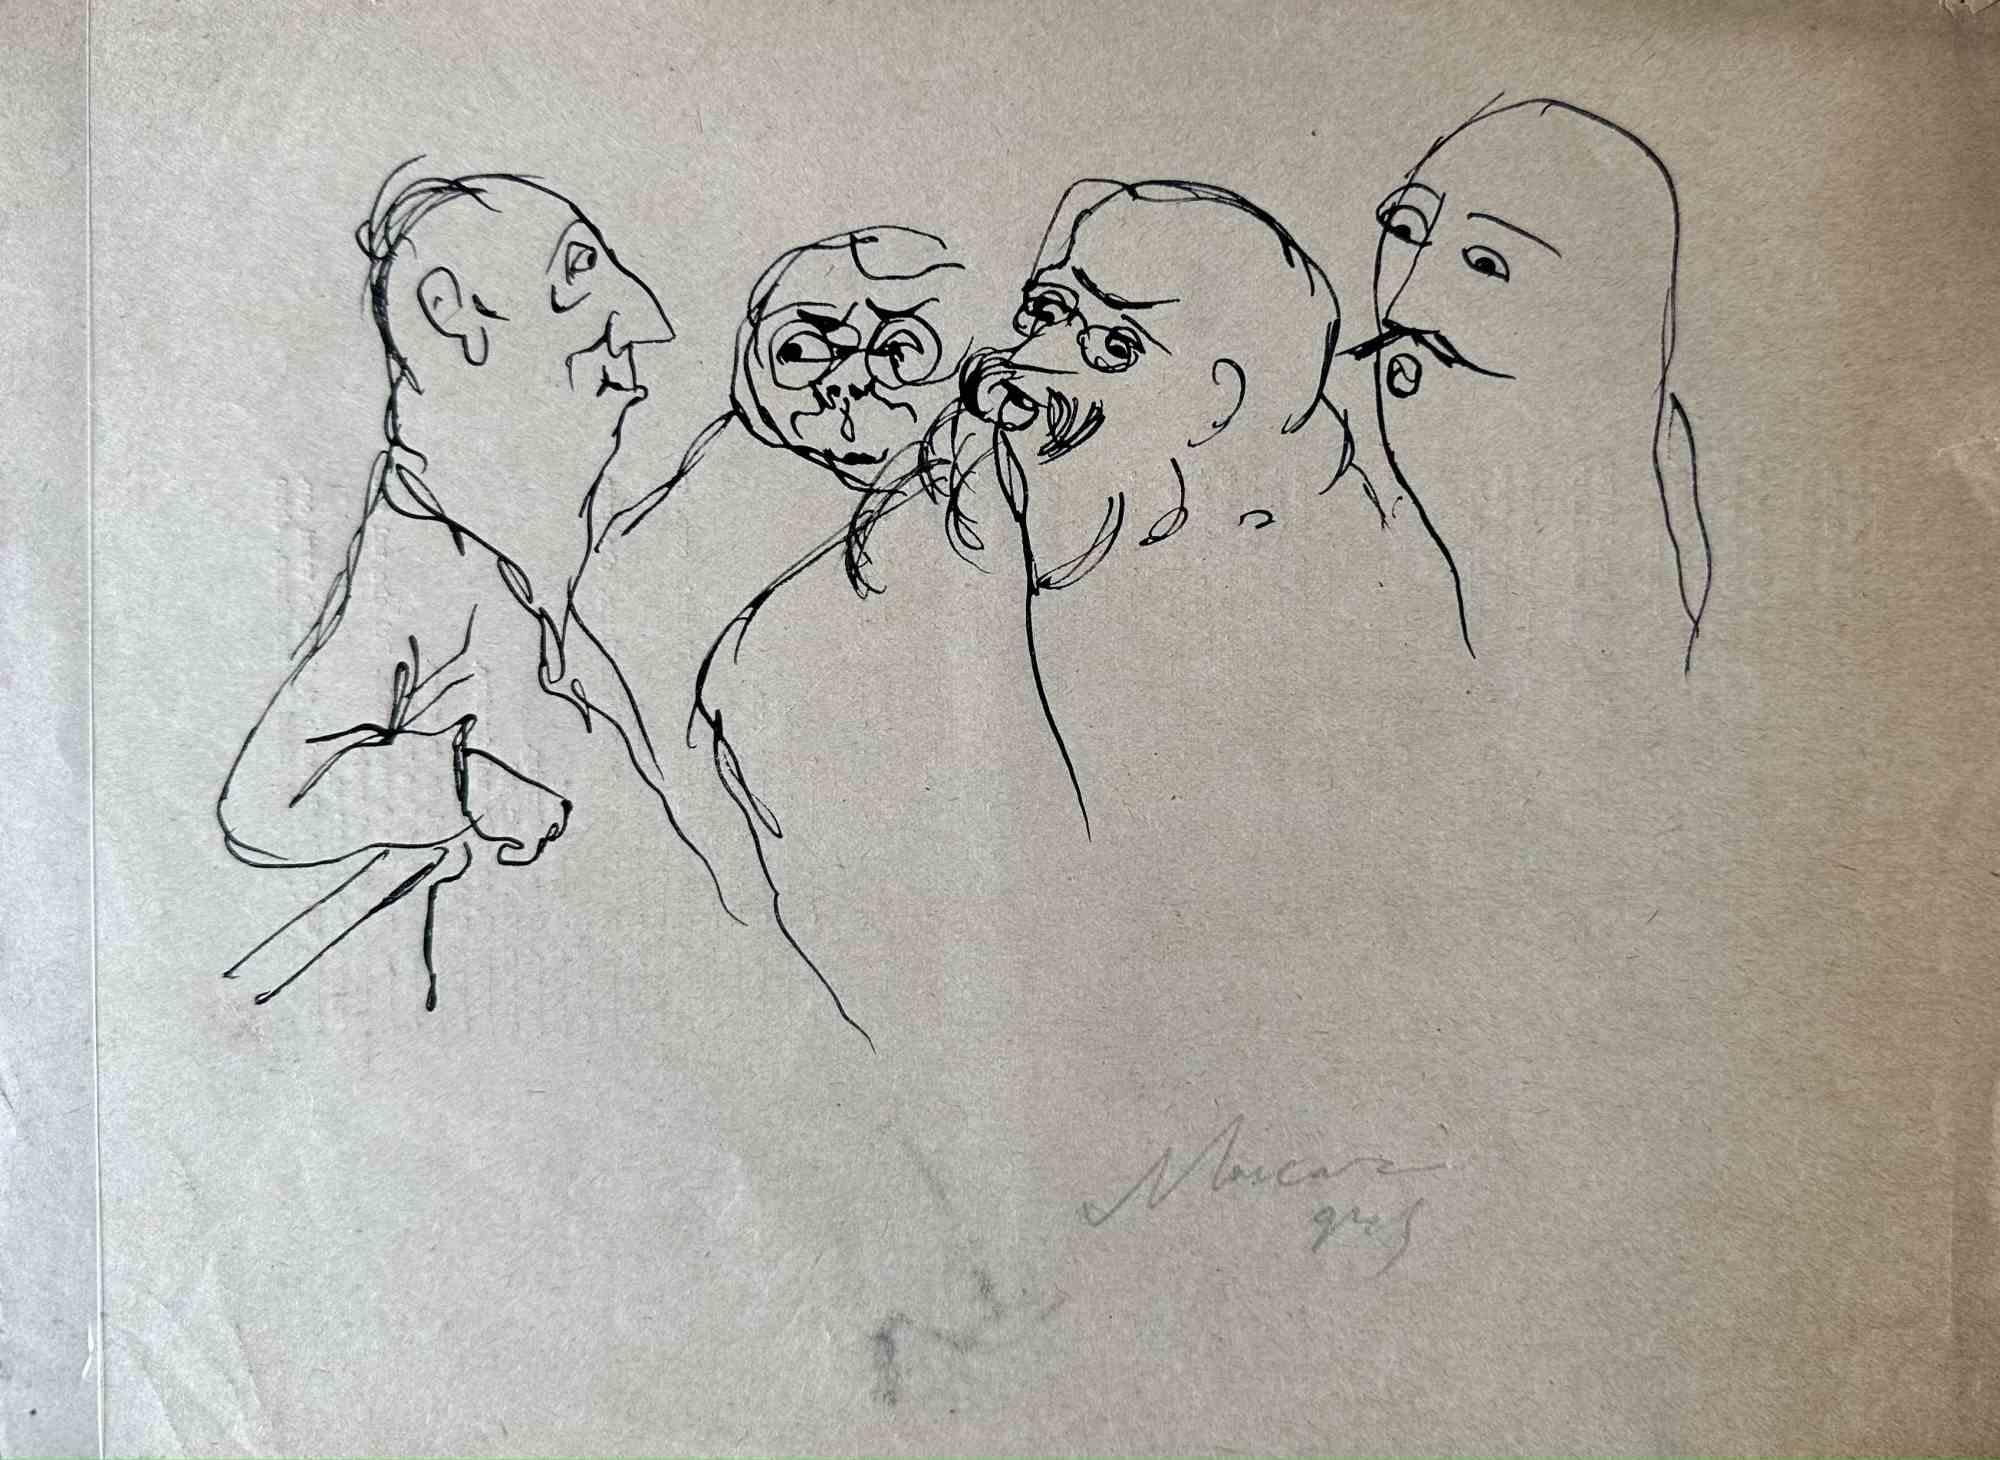 Figures is a China ink Drawing realized by Mino Maccari  (1924-1989) in 1945 ca.

Hand-signed on the lower.

Good conditions.

Mino Maccari (Siena, 1924-Rome, June 16, 1989) was an Italian writer, painter, engraver and journalist, winner of the